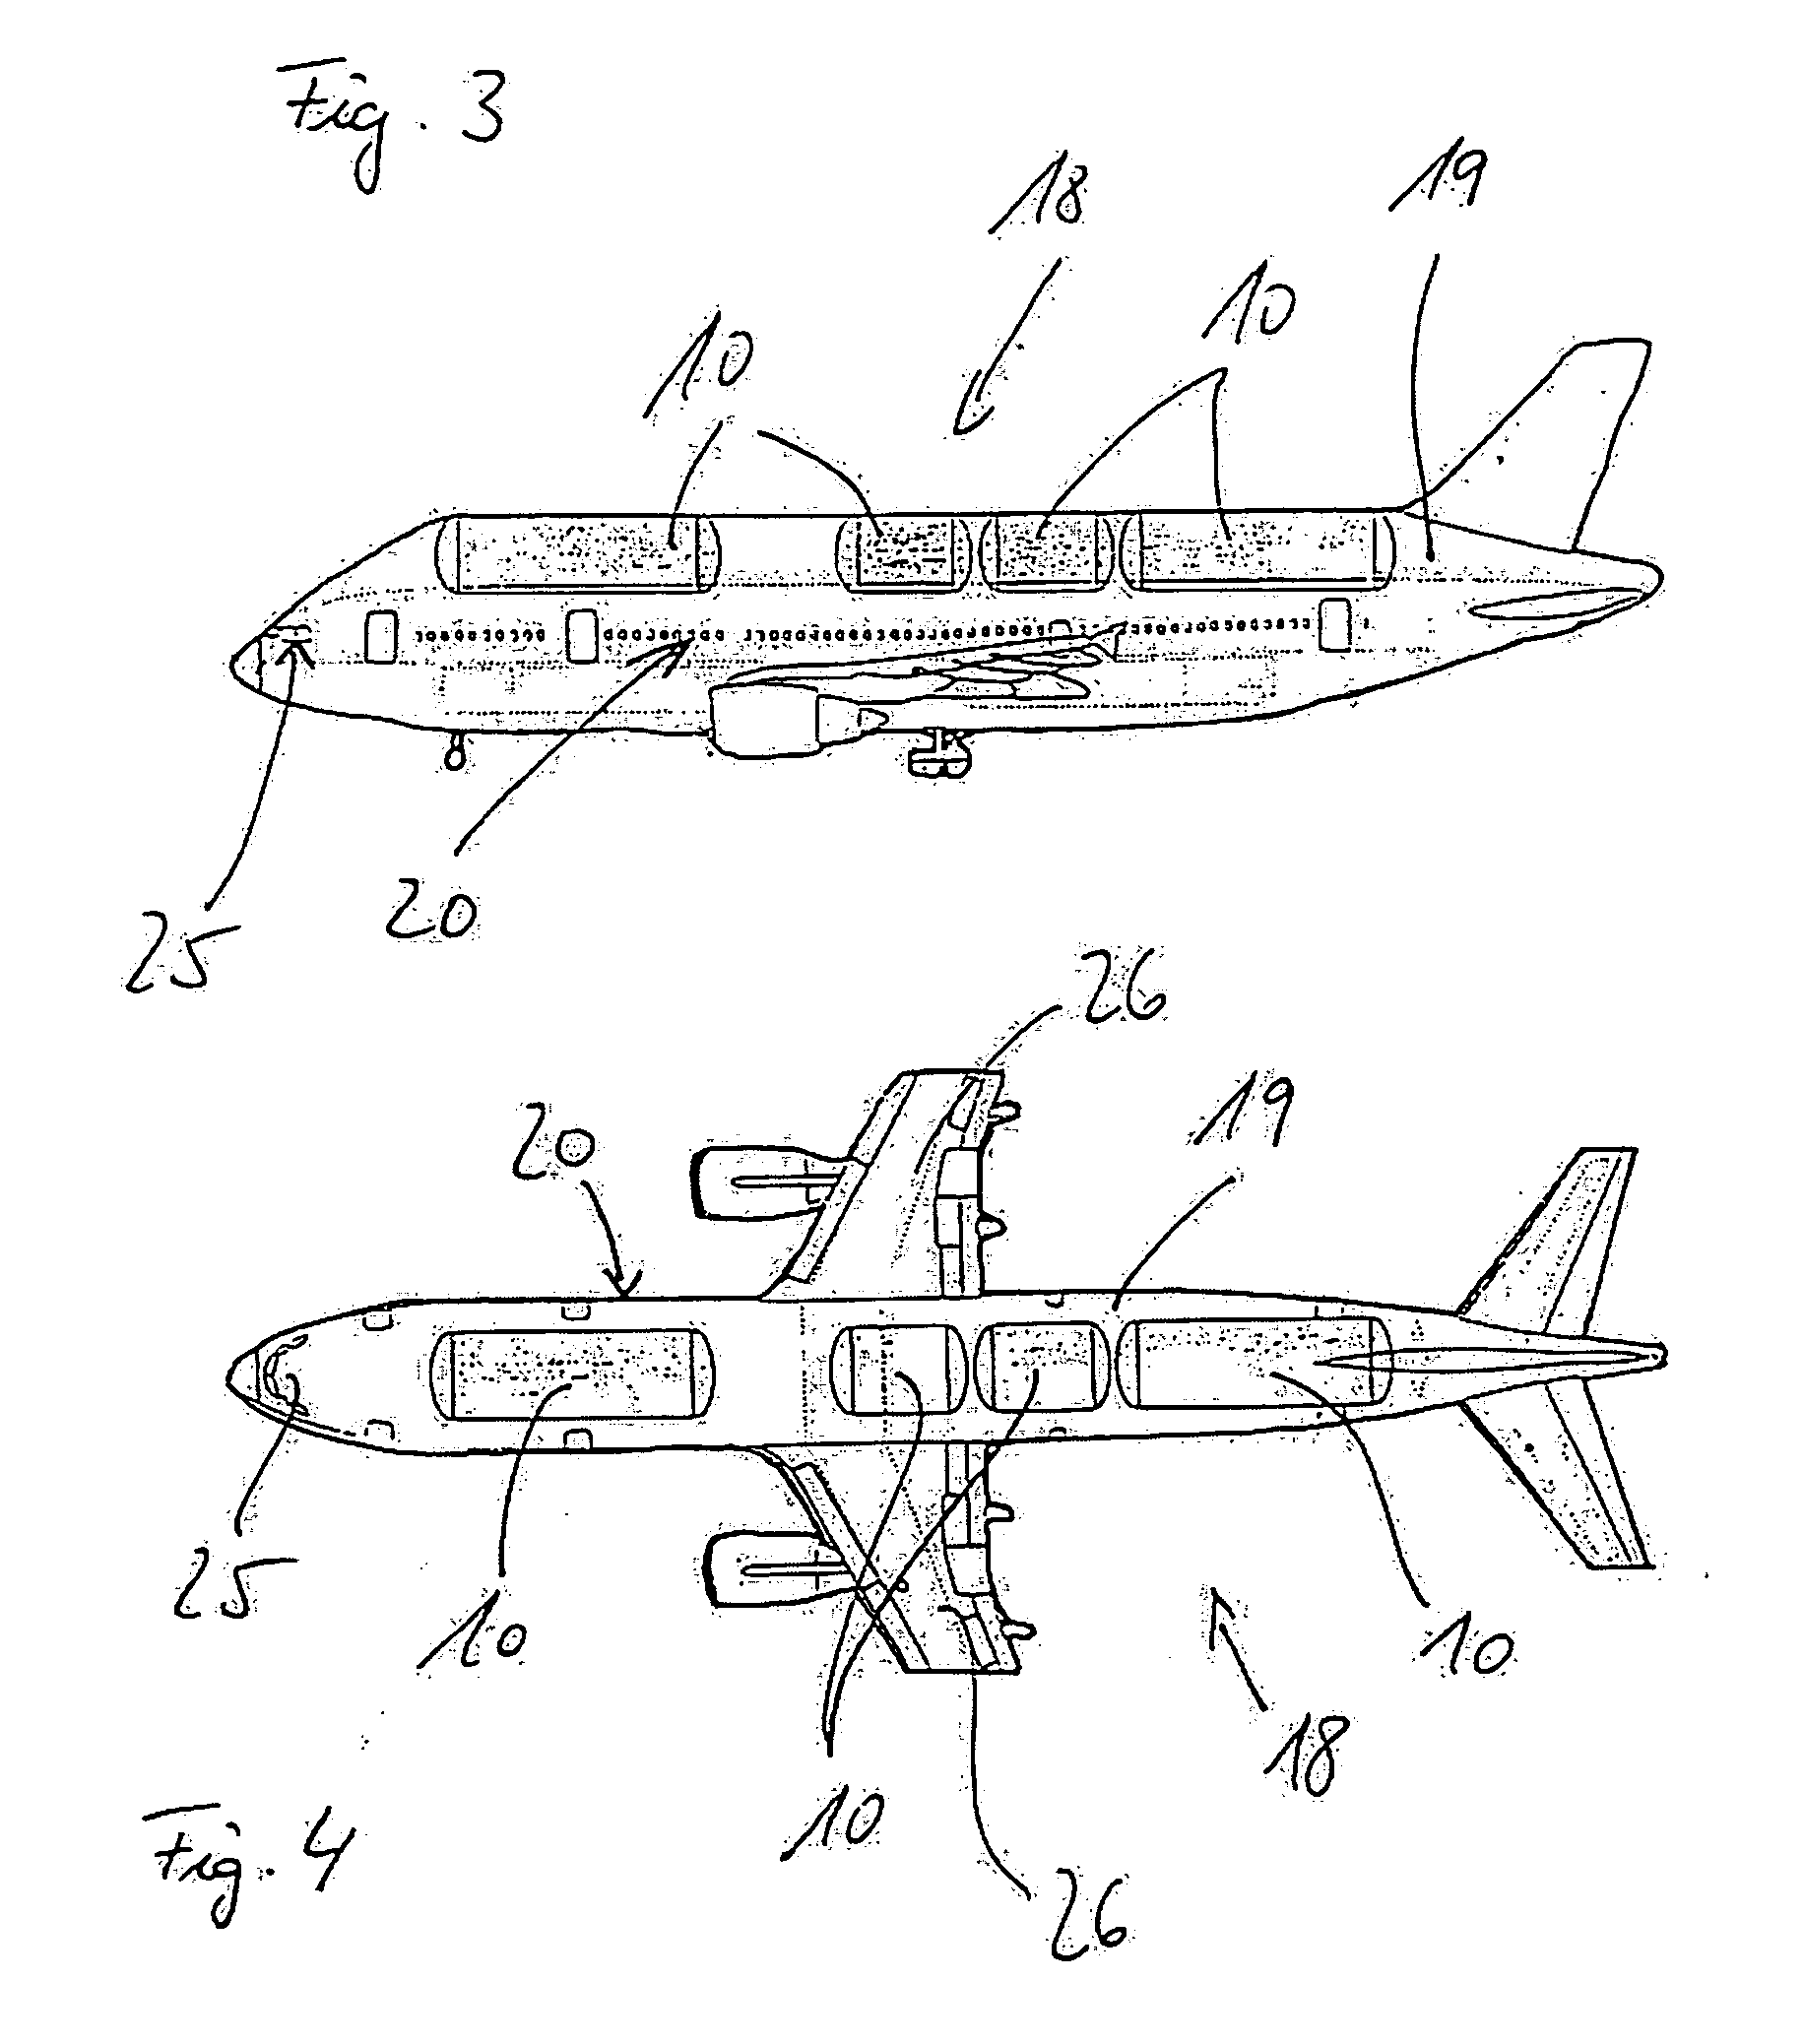 Reservoir for cryogenic fuels and vehicles